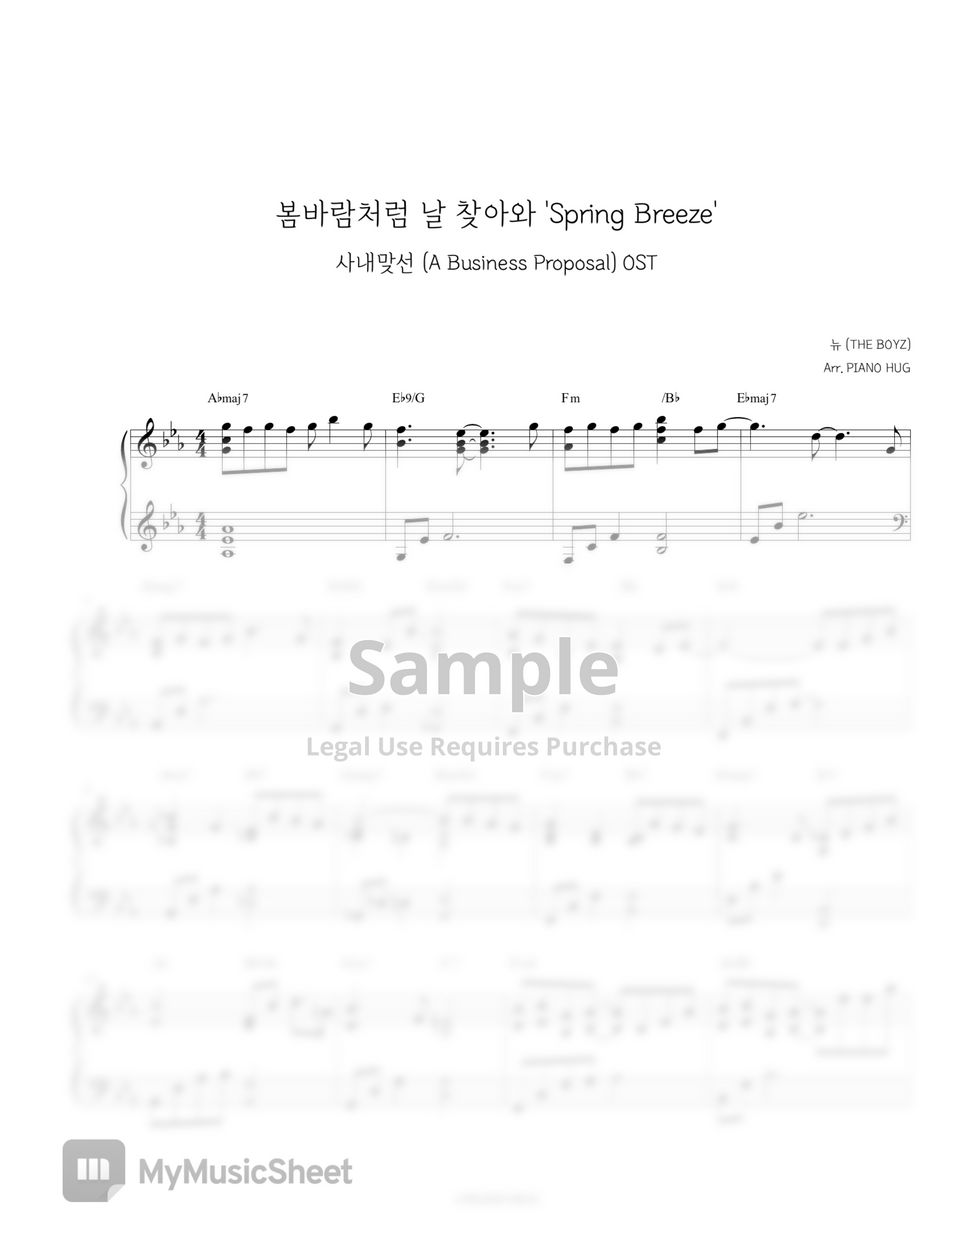 A Business Proposal (사내맞선) OST - NEW (The Boys) - Spring Breeze (봄바람처럼 날 찾아와) by Piano Hug